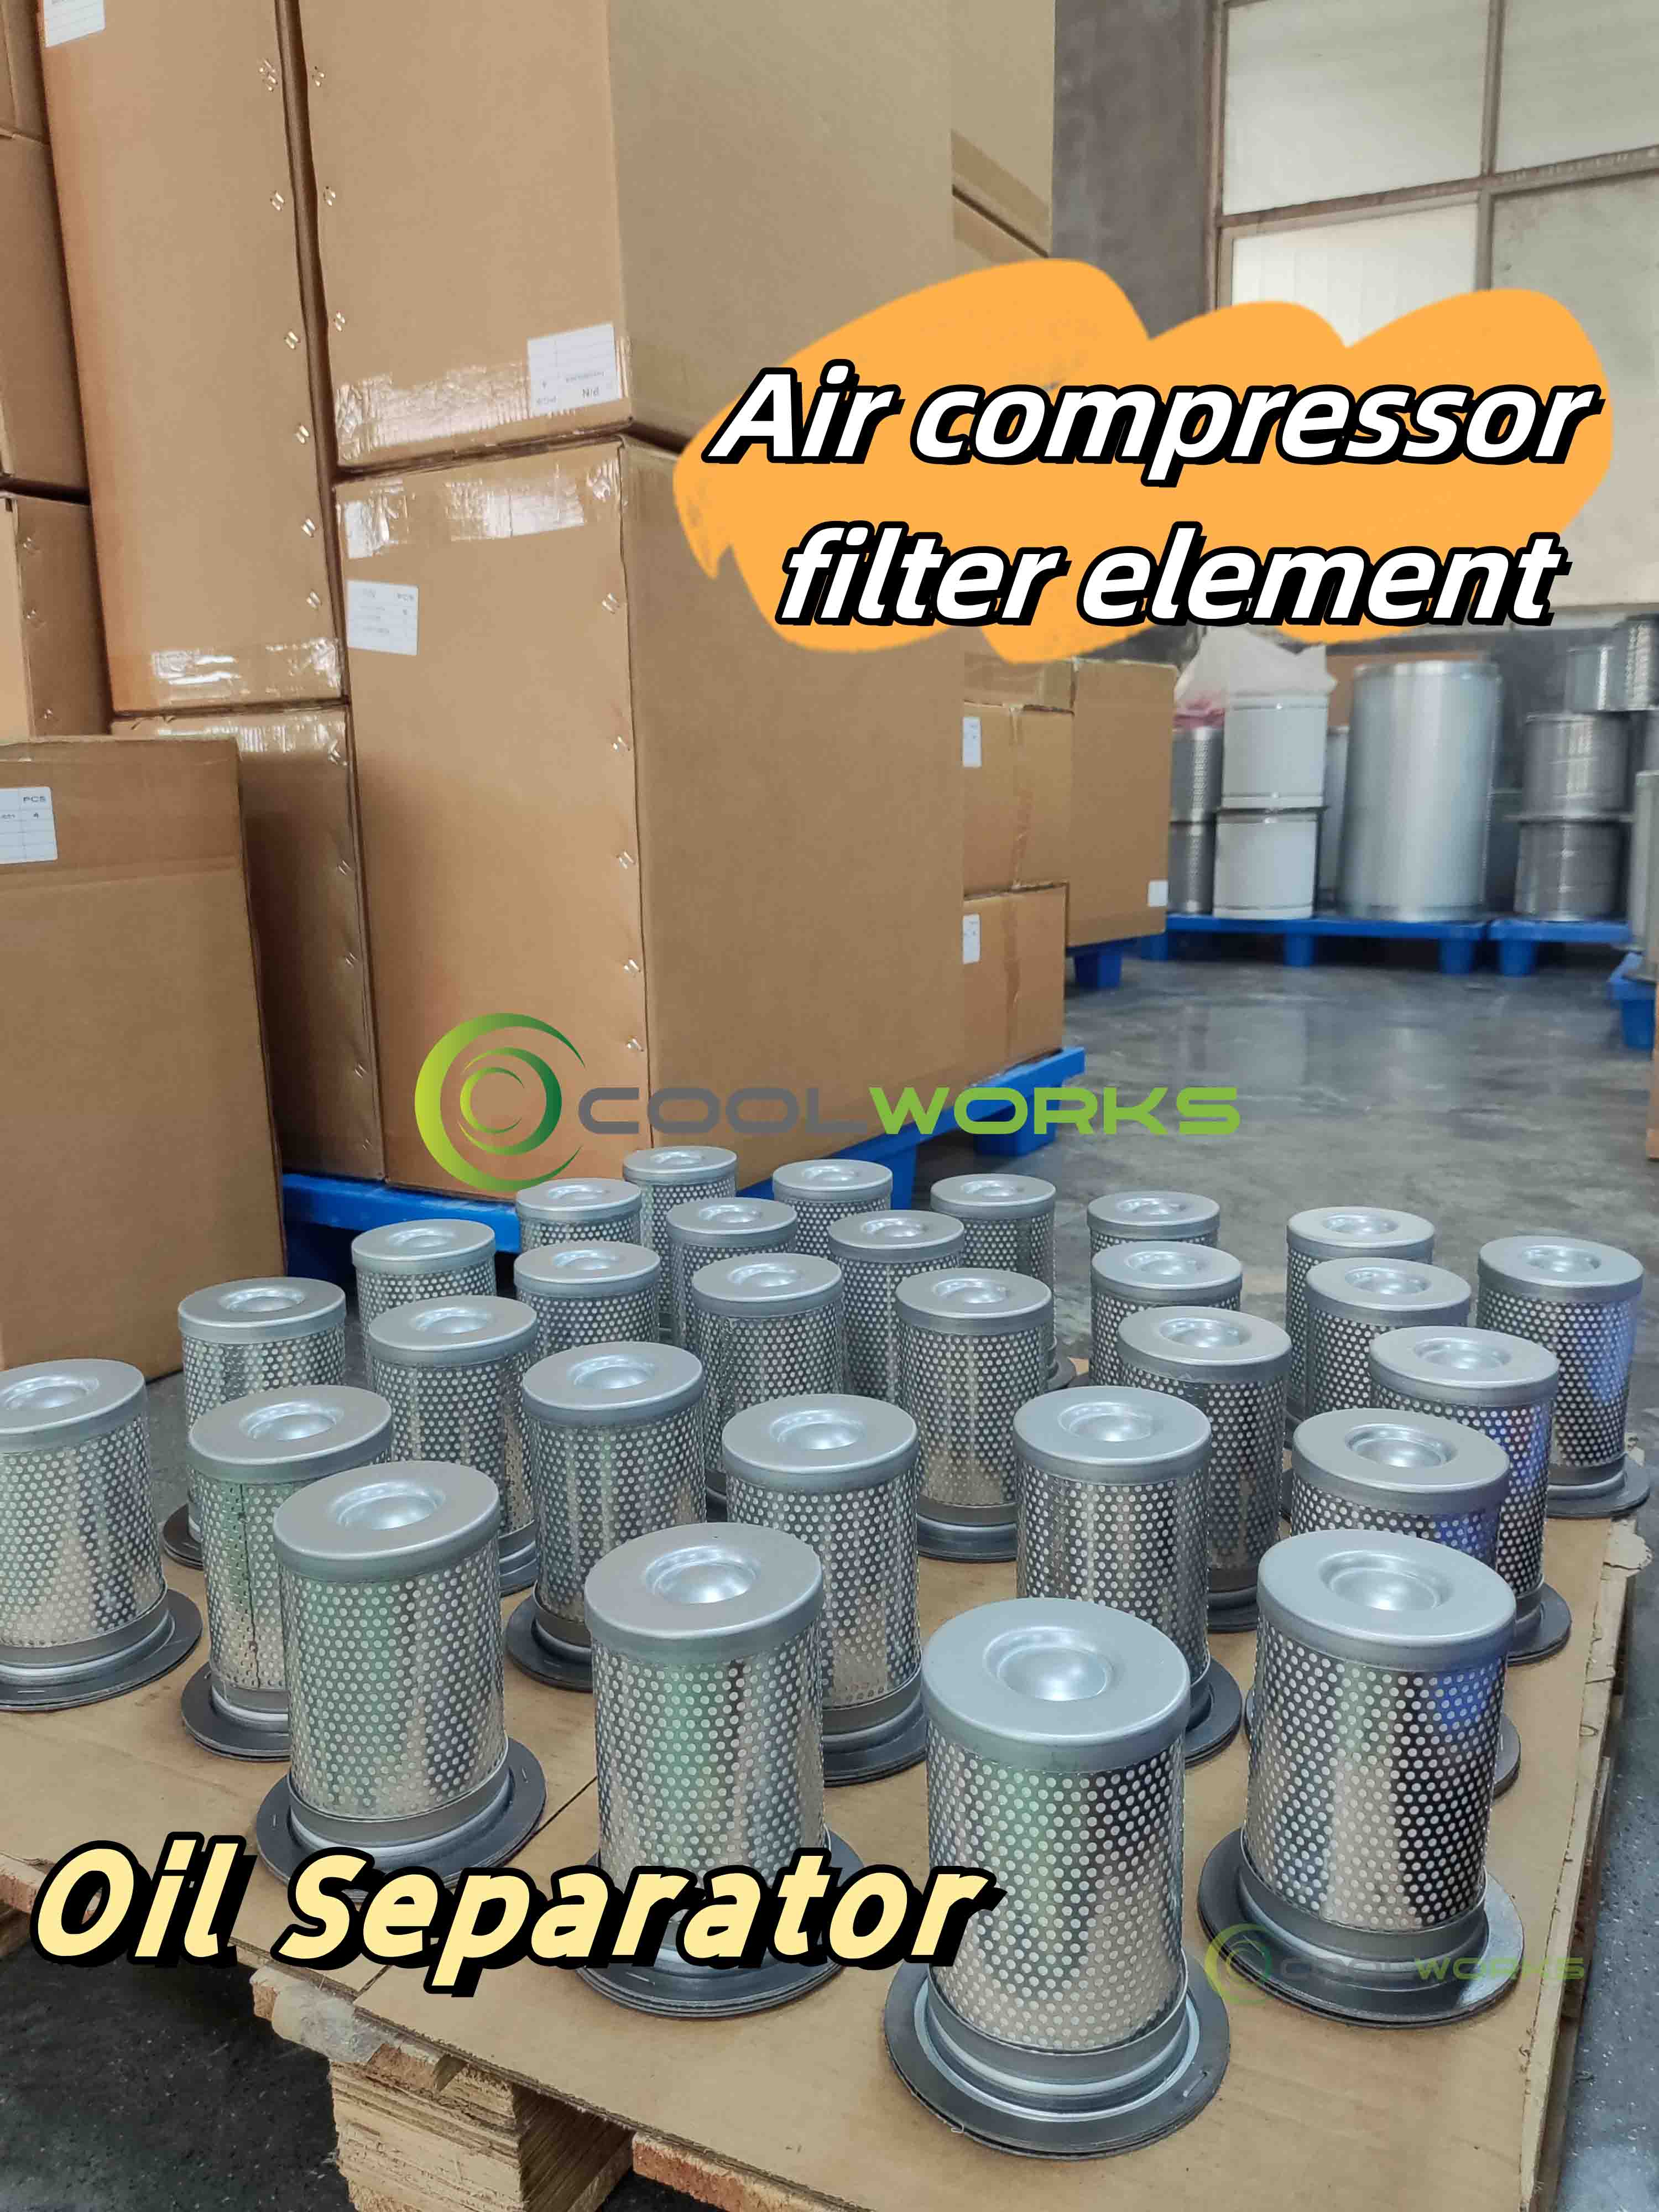 Coolworks Oil separator